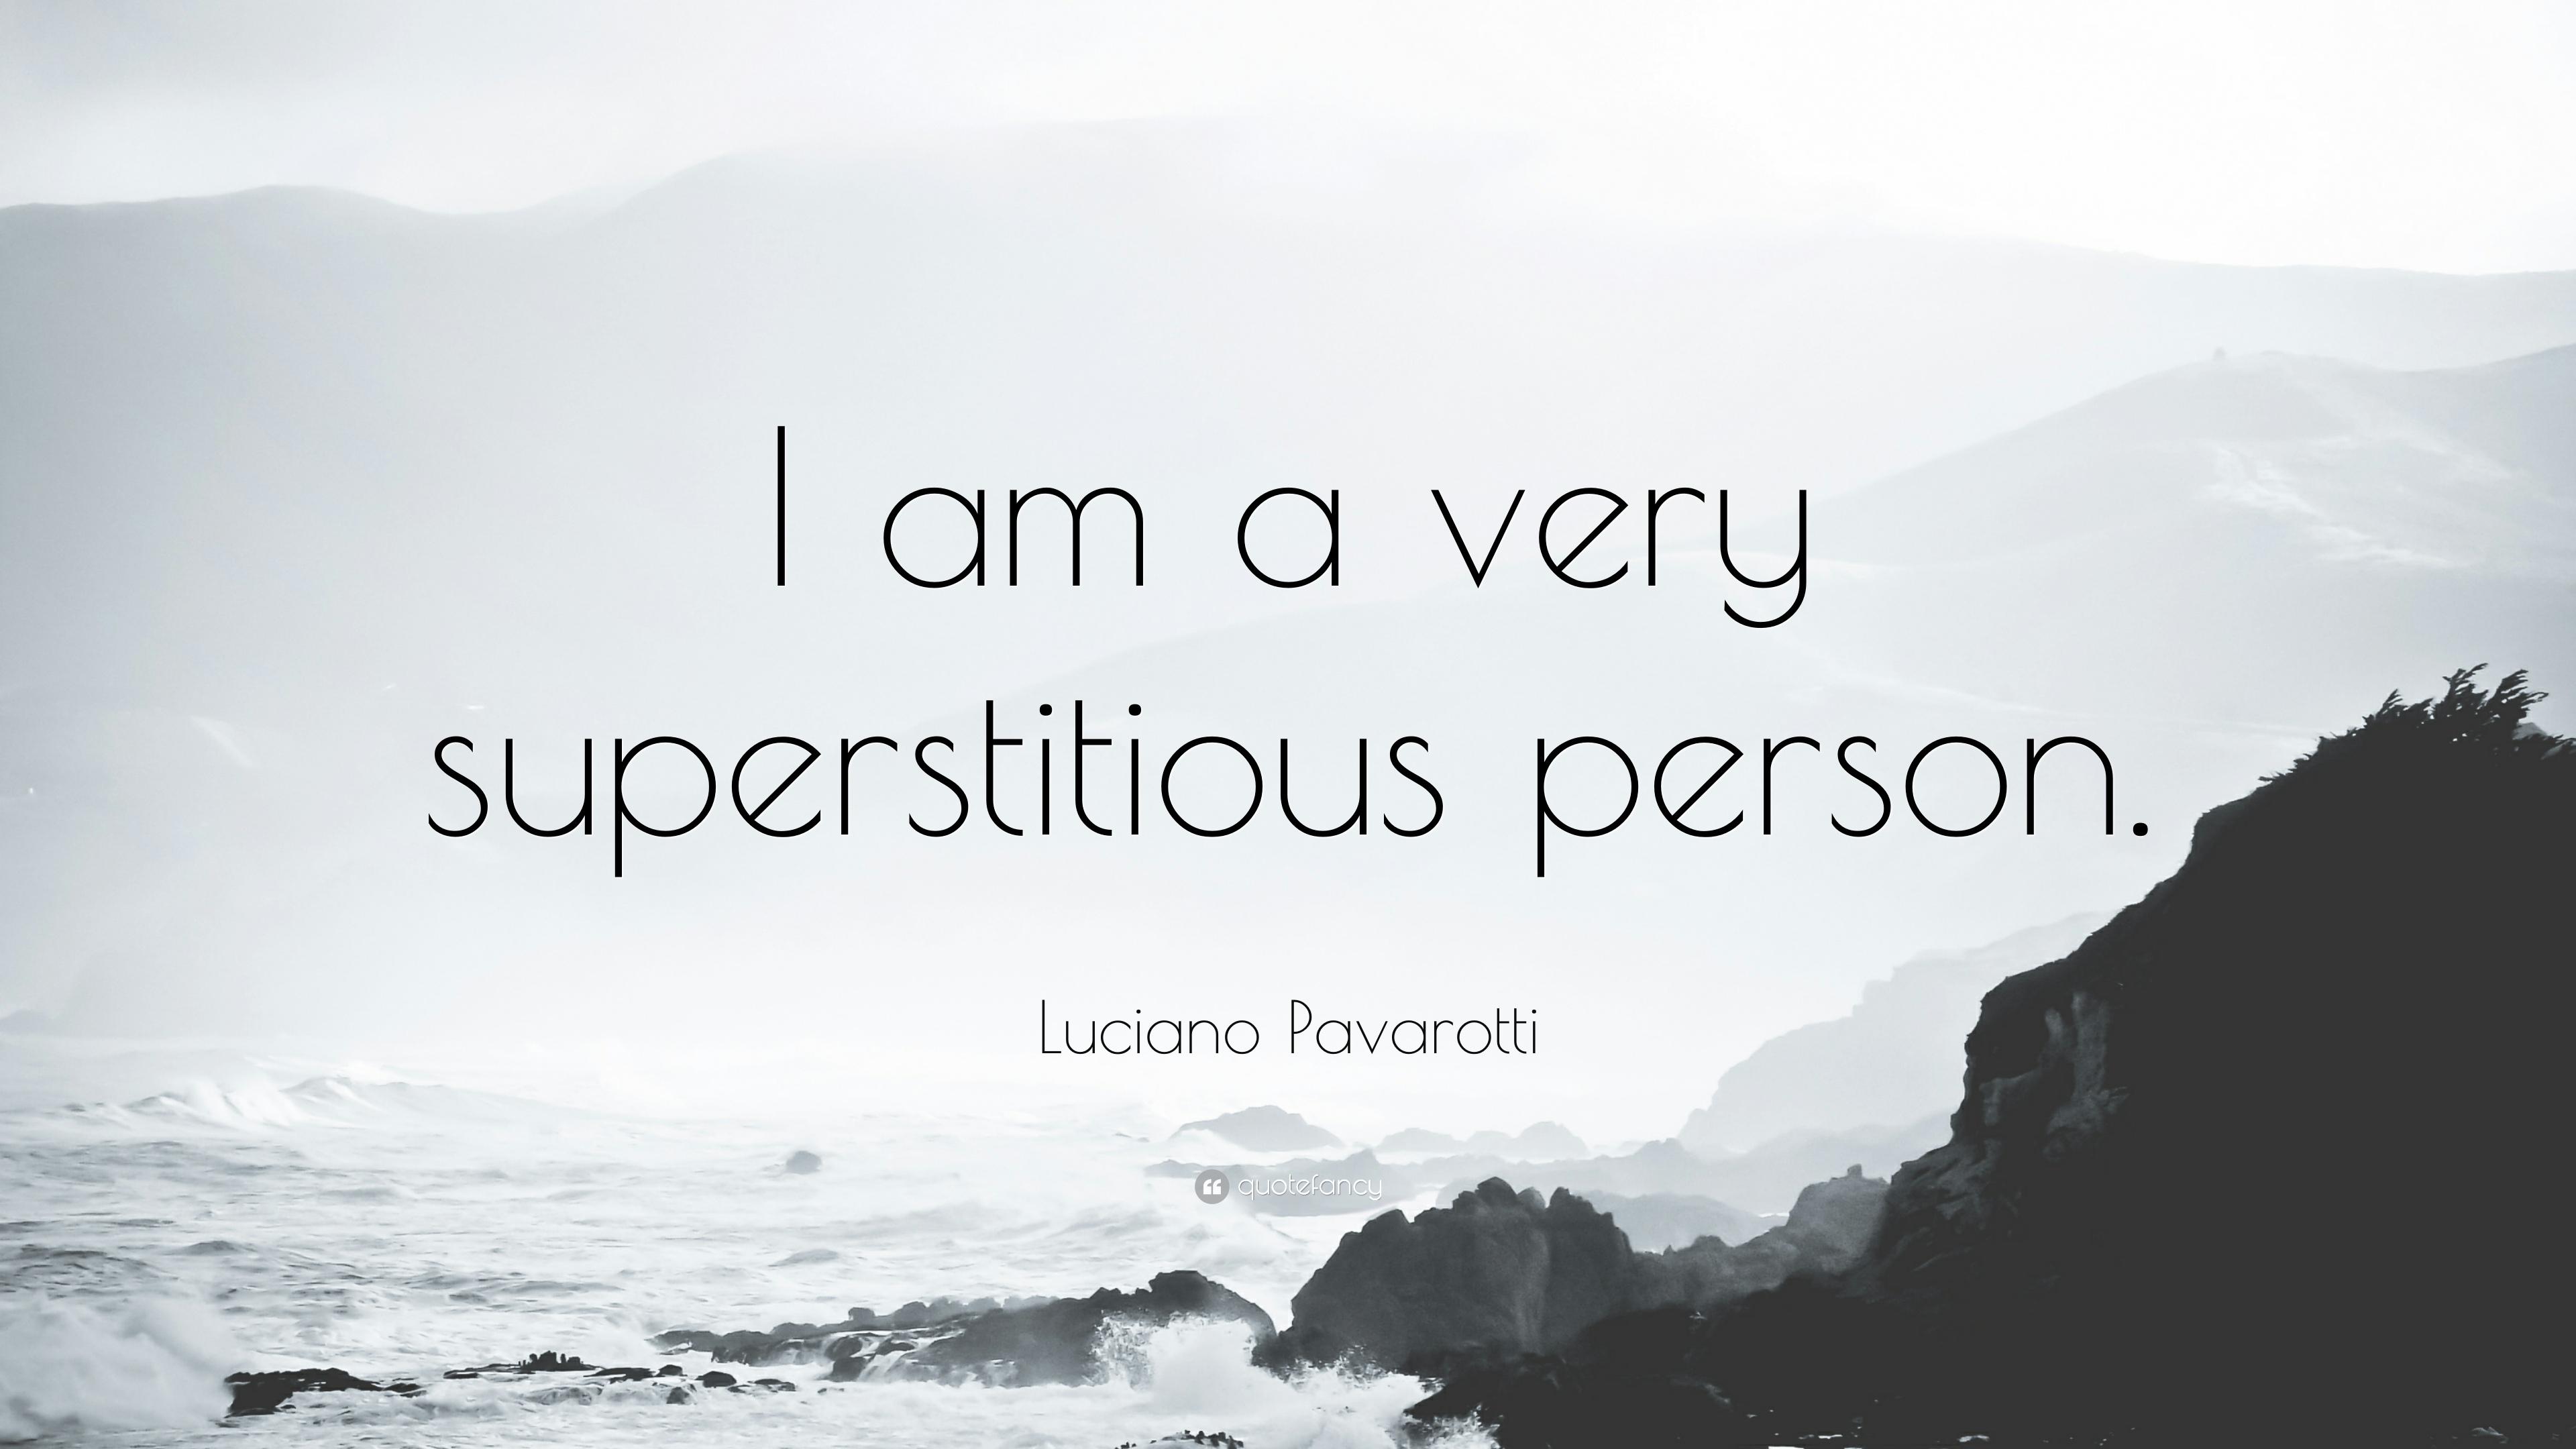 Luciano Pavarotti Quote: “I am a very superstitious person.” 7